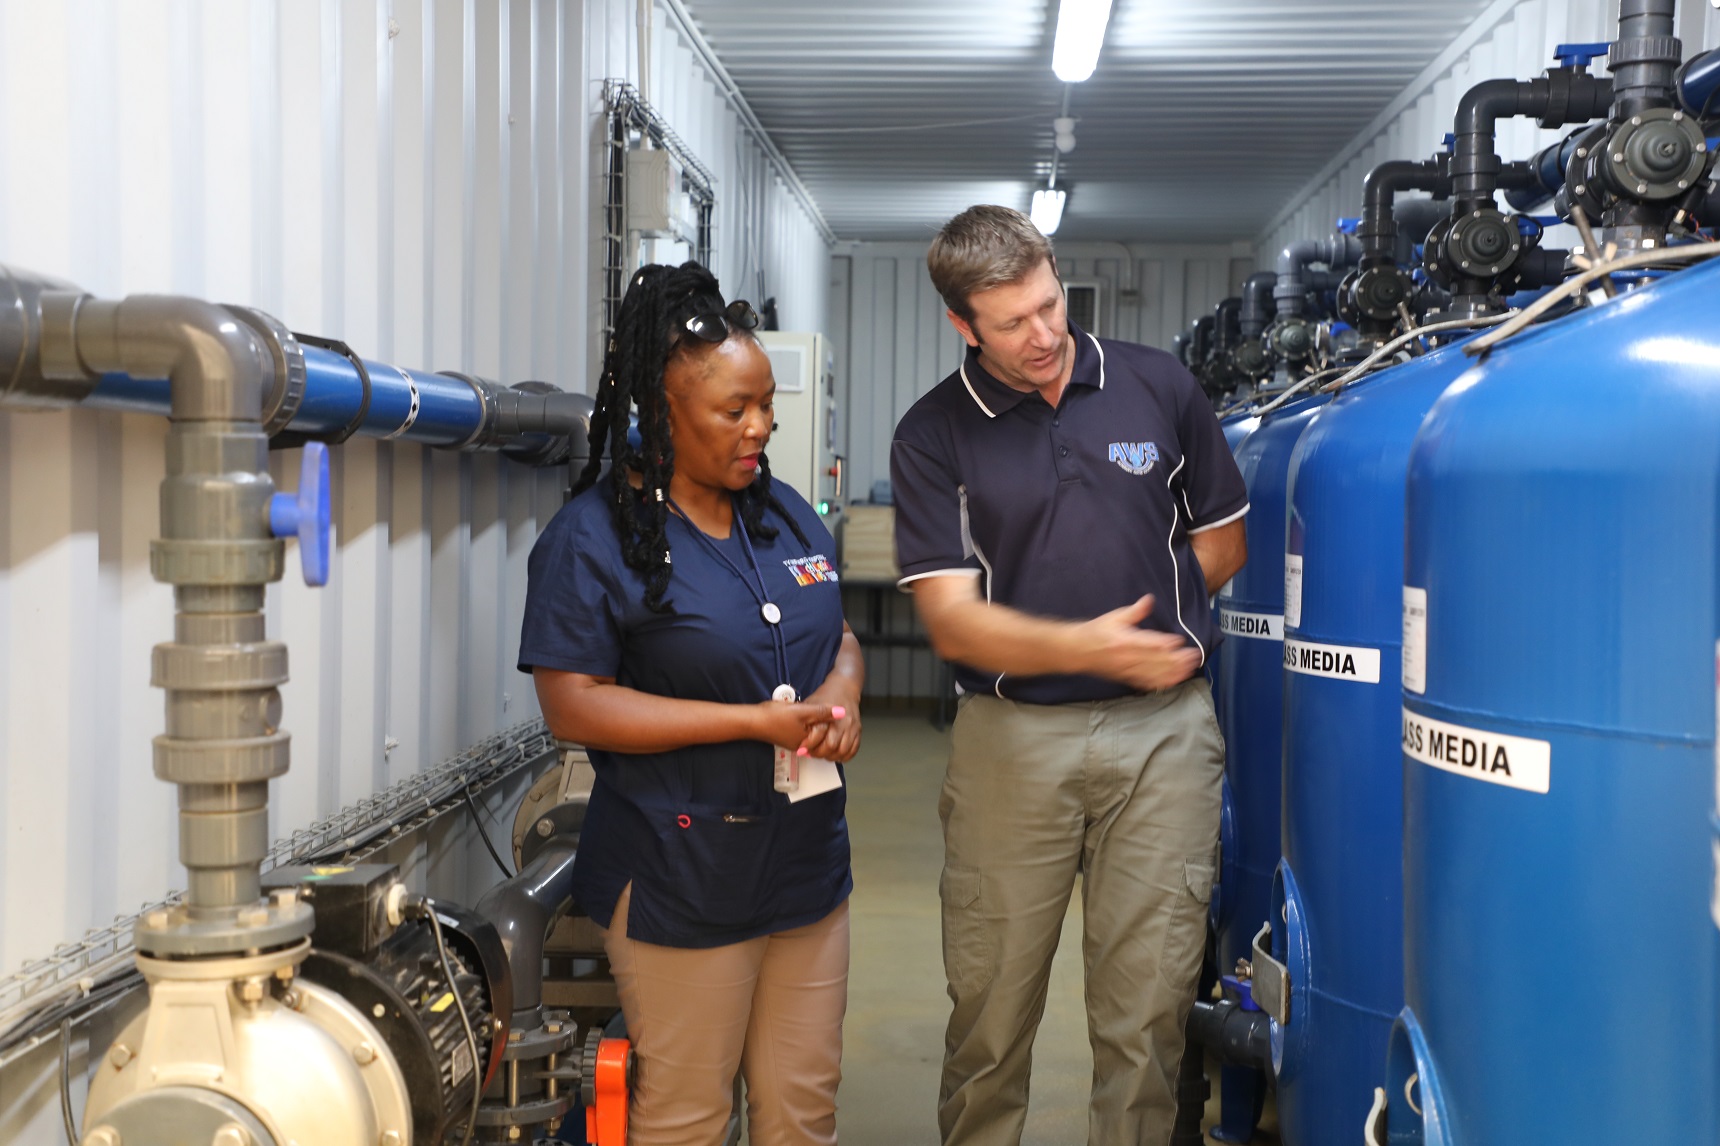 Minister Mbombo viewing the water treatment plant, where raw water from the boreholes enters a pre-filtration unit before being pumped in a reverse osmosis system. Thereafter, the water is pumped into Tygerberg Hospital’s reservoirs.